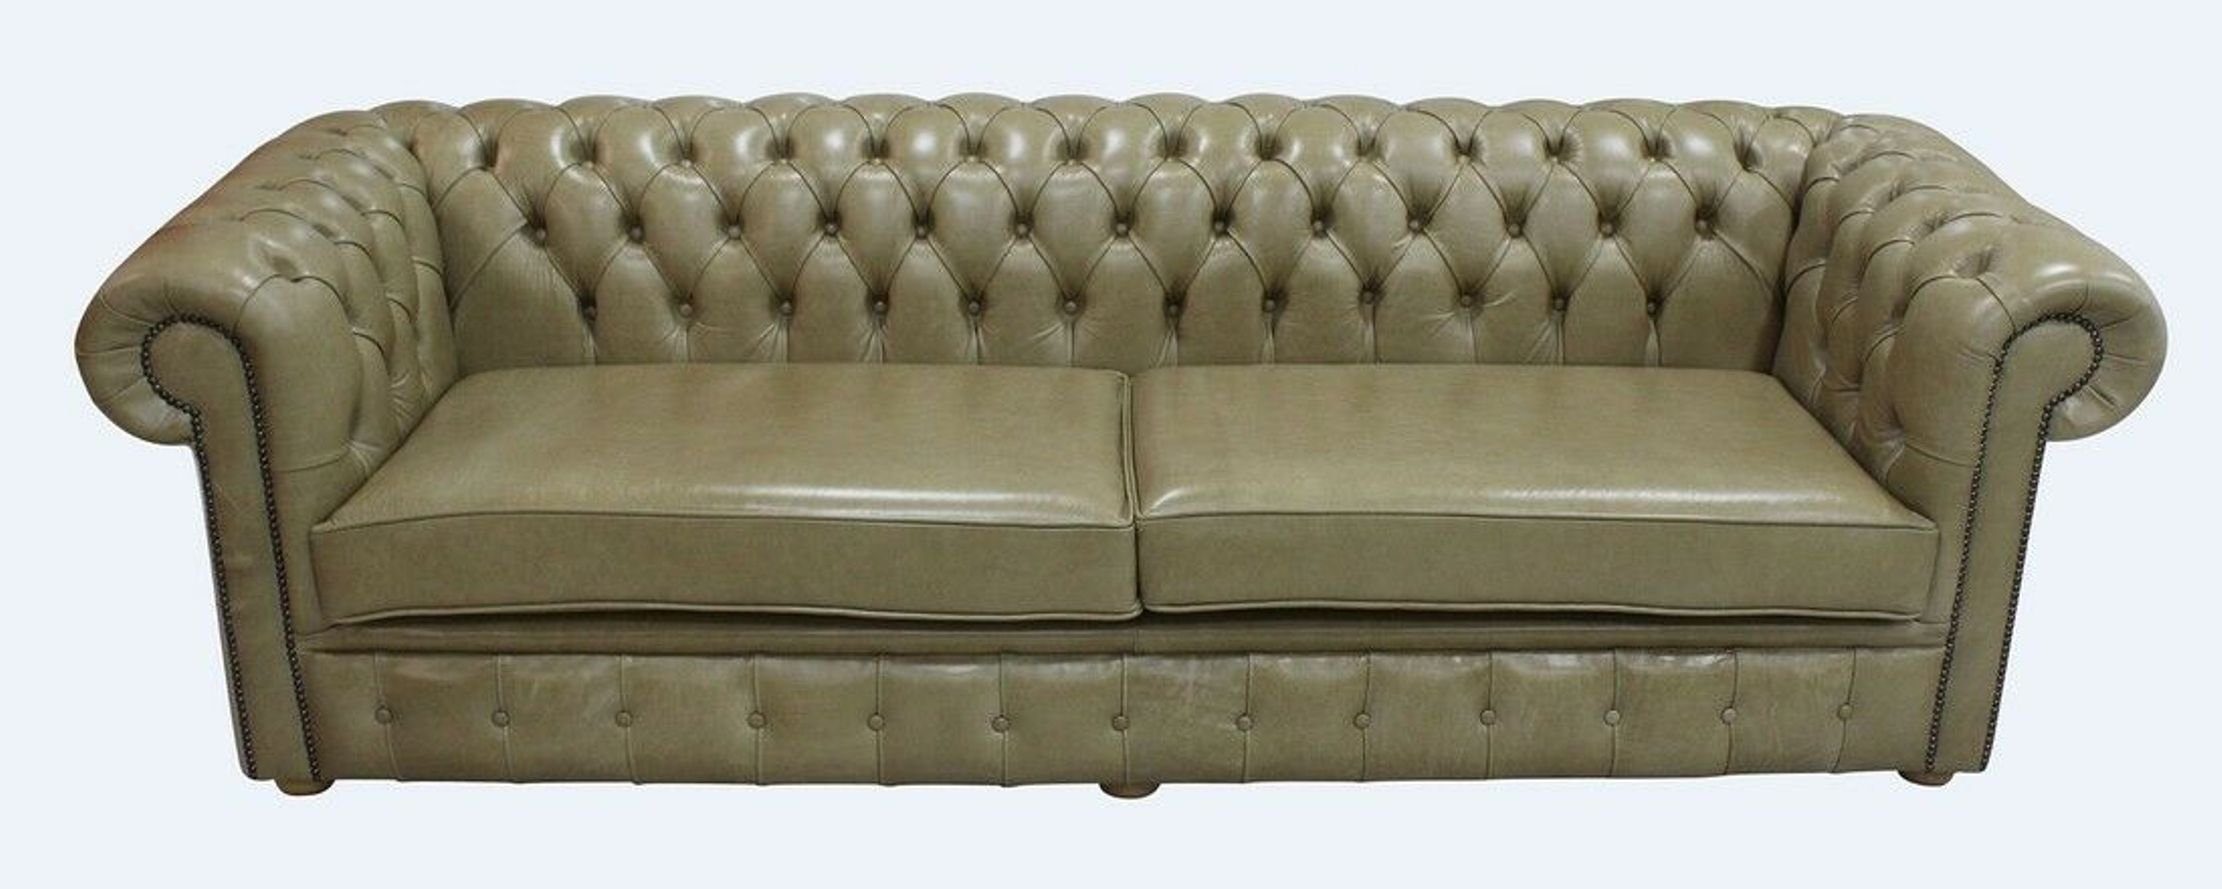 Couch Design Polster Chesterfield-Sofa, JVmoebel Chesterfield Sofa Luxus